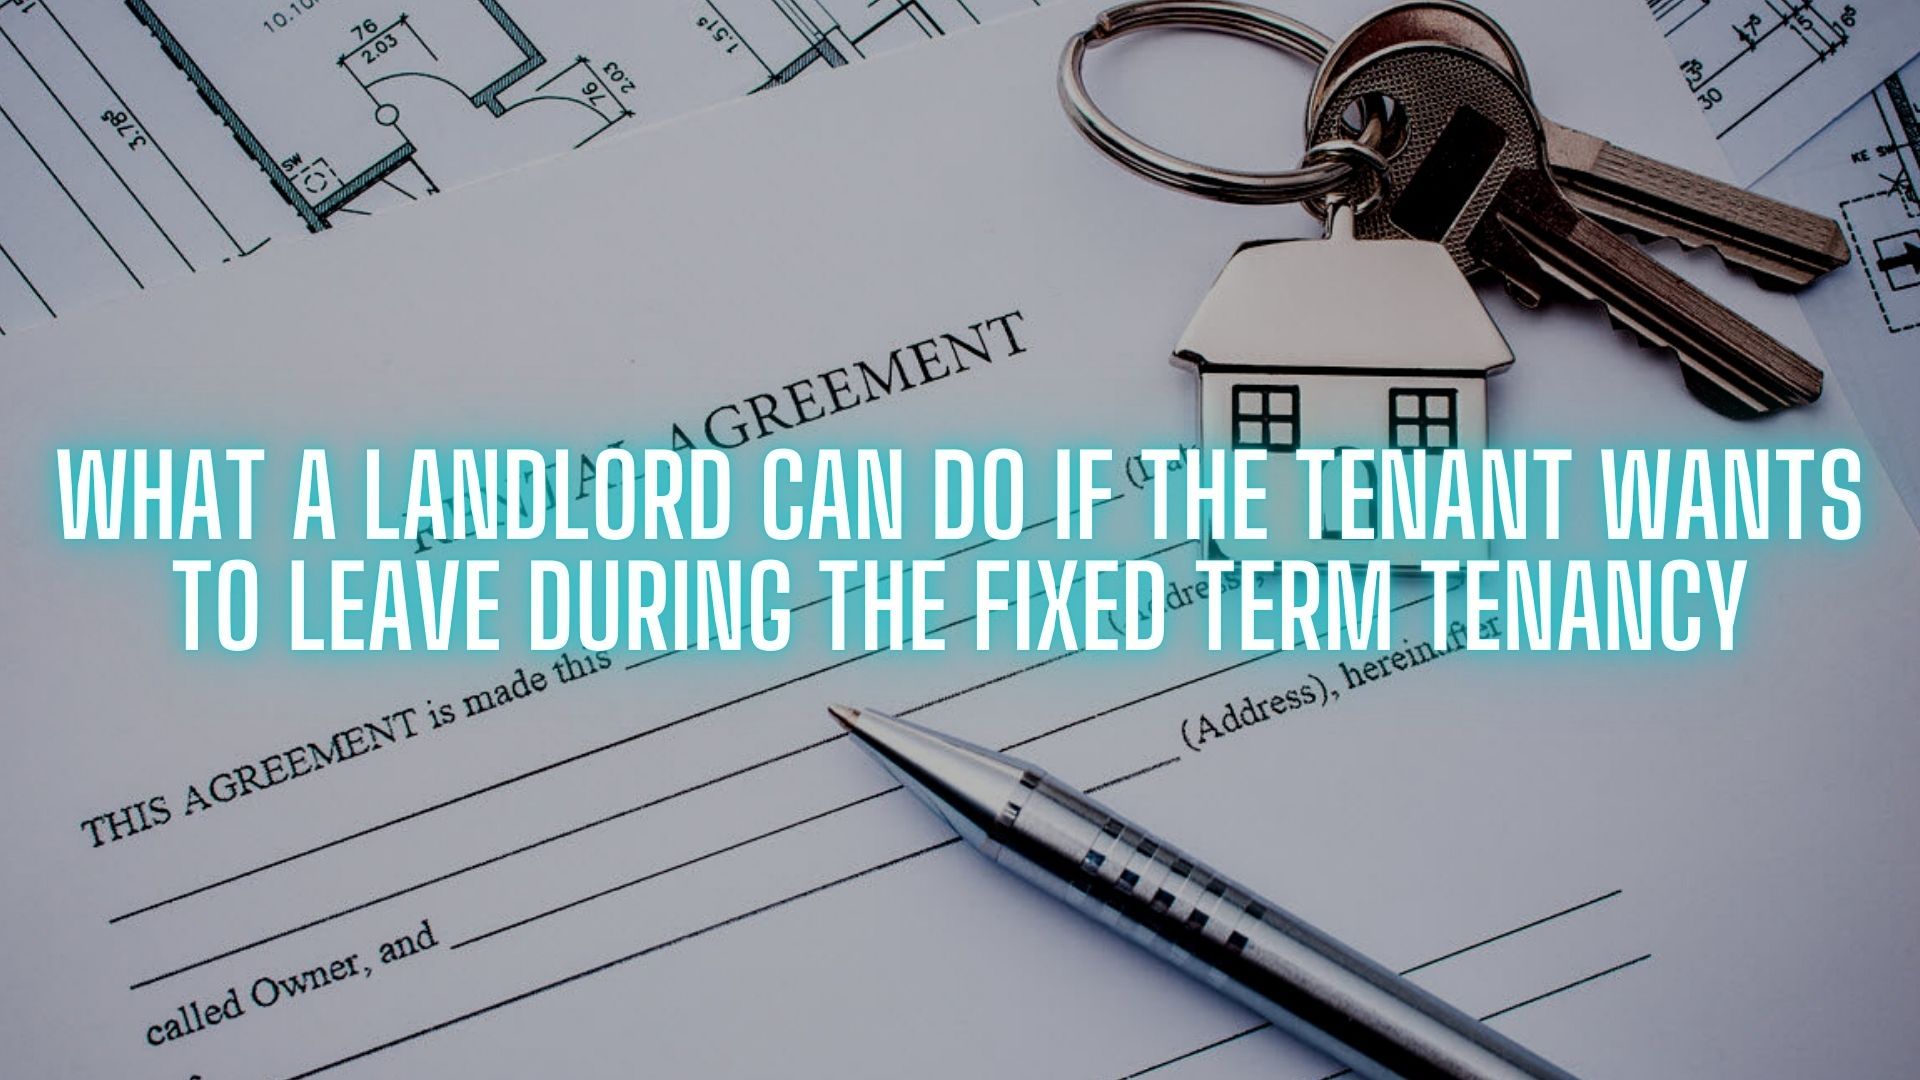 What a landlord can do if the tenant wants to leave during the fixed term tenancy